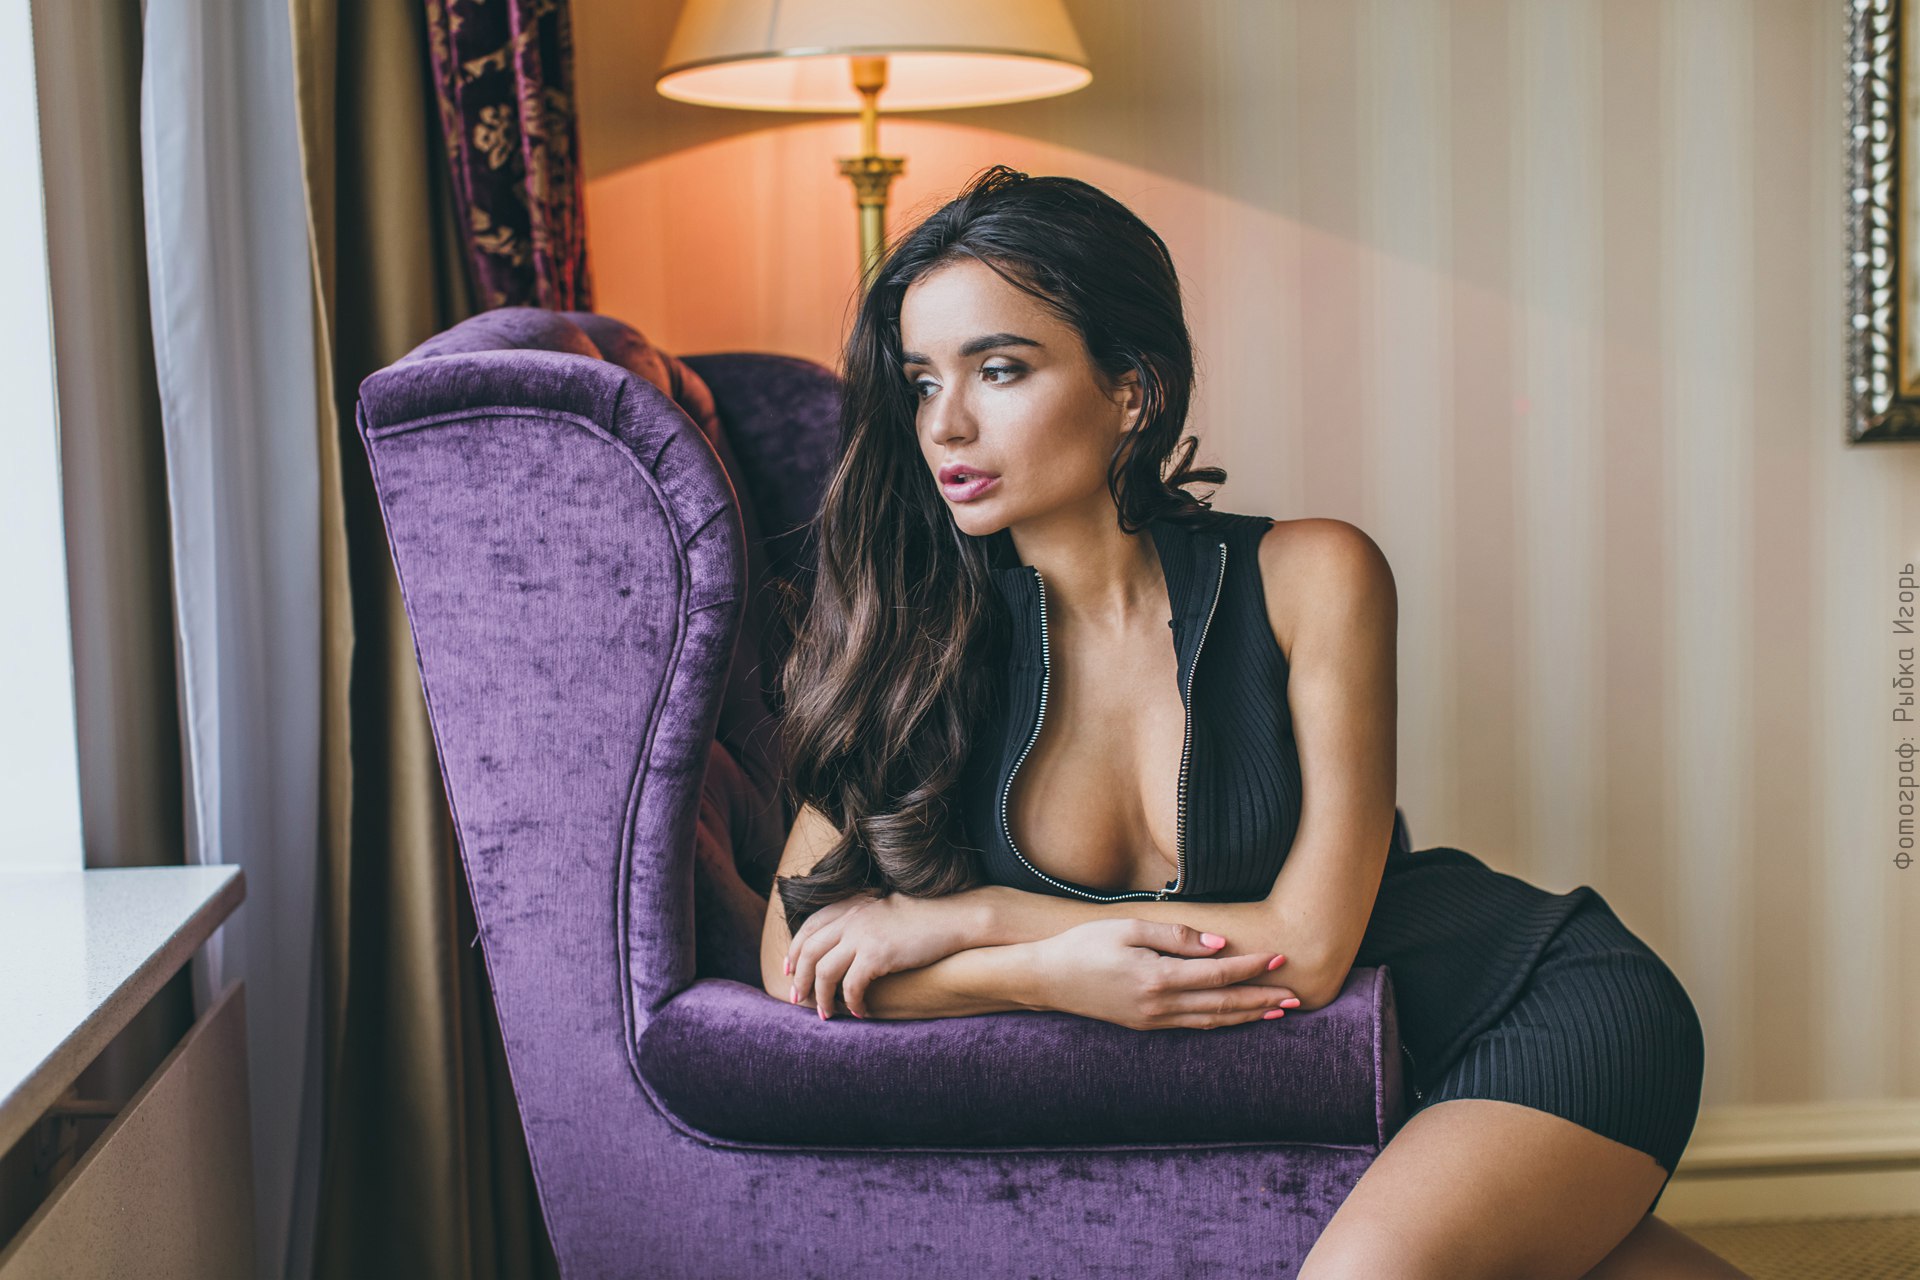 People 1920x1280 women Ekaterina Zueva tanned black dress lamp looking away cleavage no bra open clothes looking out window brunette watermarked Igor Rybka